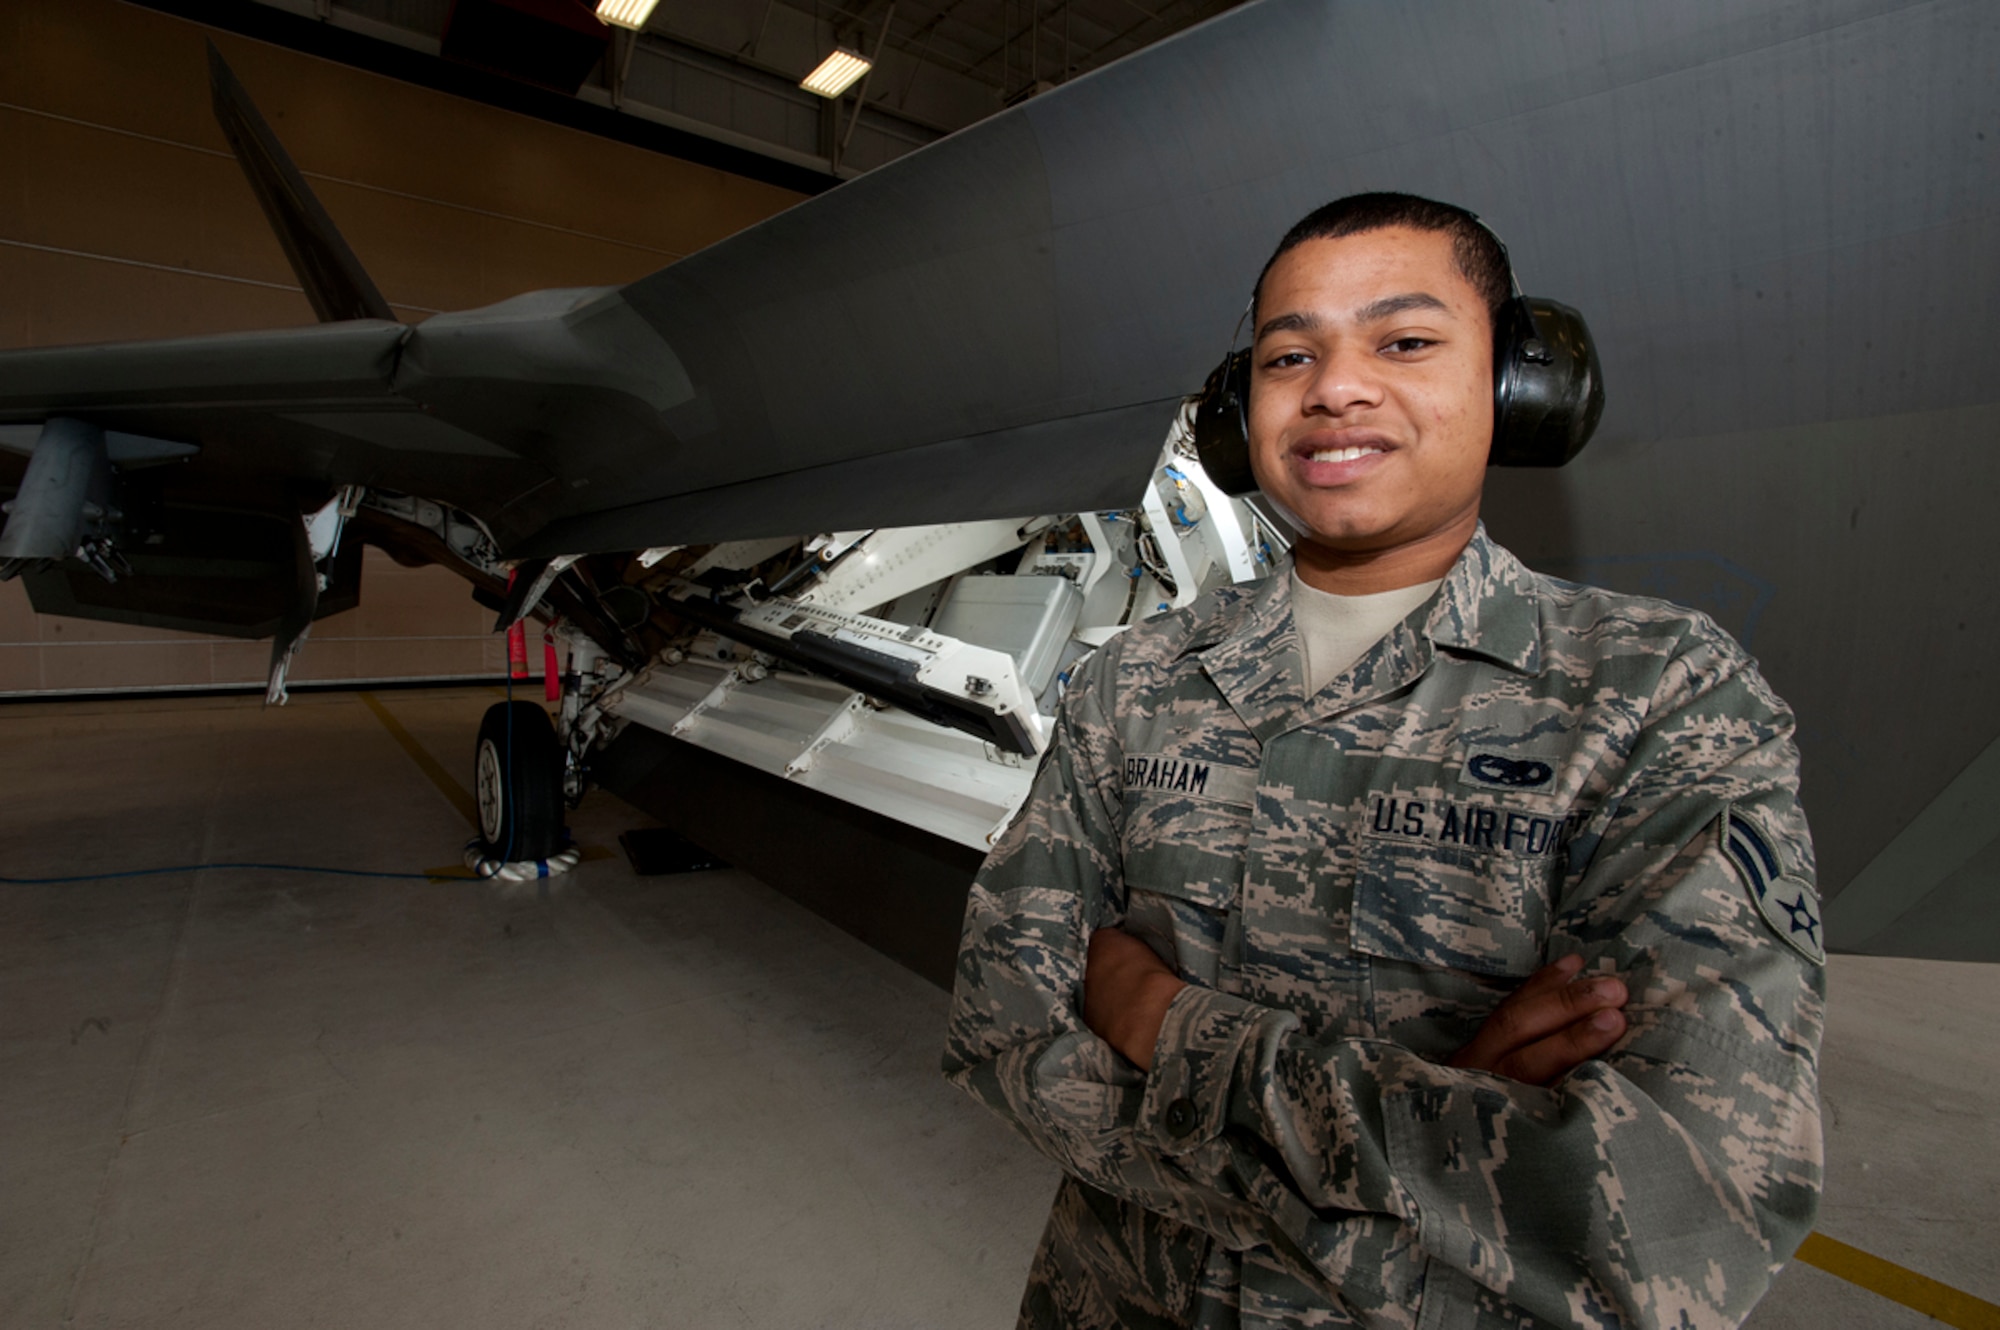 Airman 1st Class Kyron Abraham is an F-22 Raptor weapons specialist with the 3rd Aircraft Maintenance Squadron at Joint Base Elmendorf-Richardson, Alaska. Abraham is part of a three-man team that loads weapons onto the stealth fighters, and is a native of Reistertown, Md. (U.S. Air Force photo/Staff Sgt. Robert Barnett)